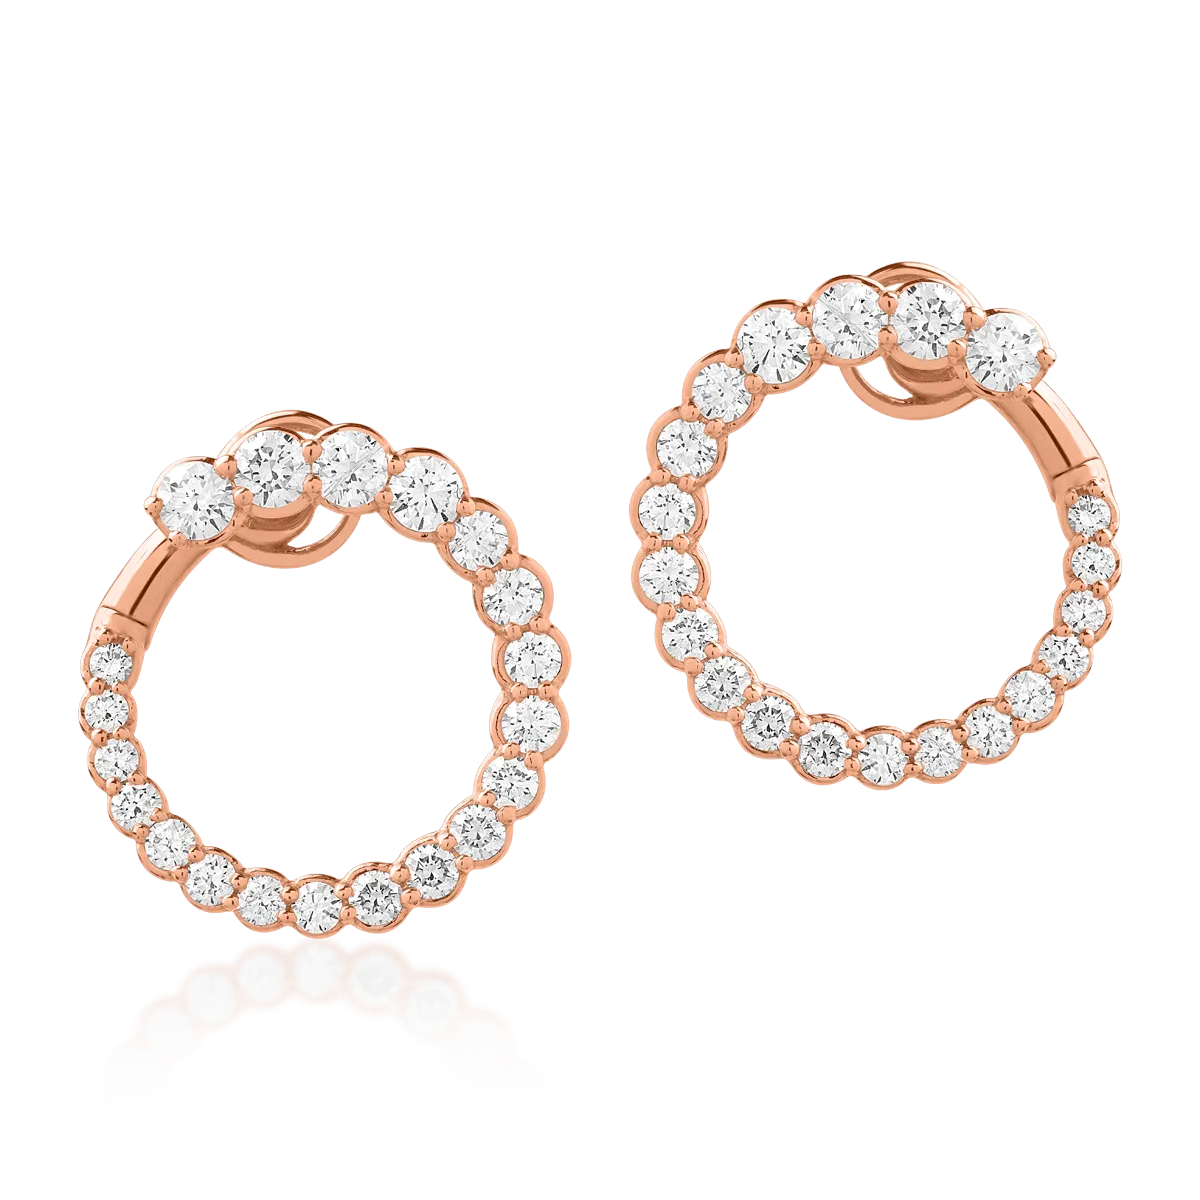 18K rose gold earrings with diamonds of 2.48ct